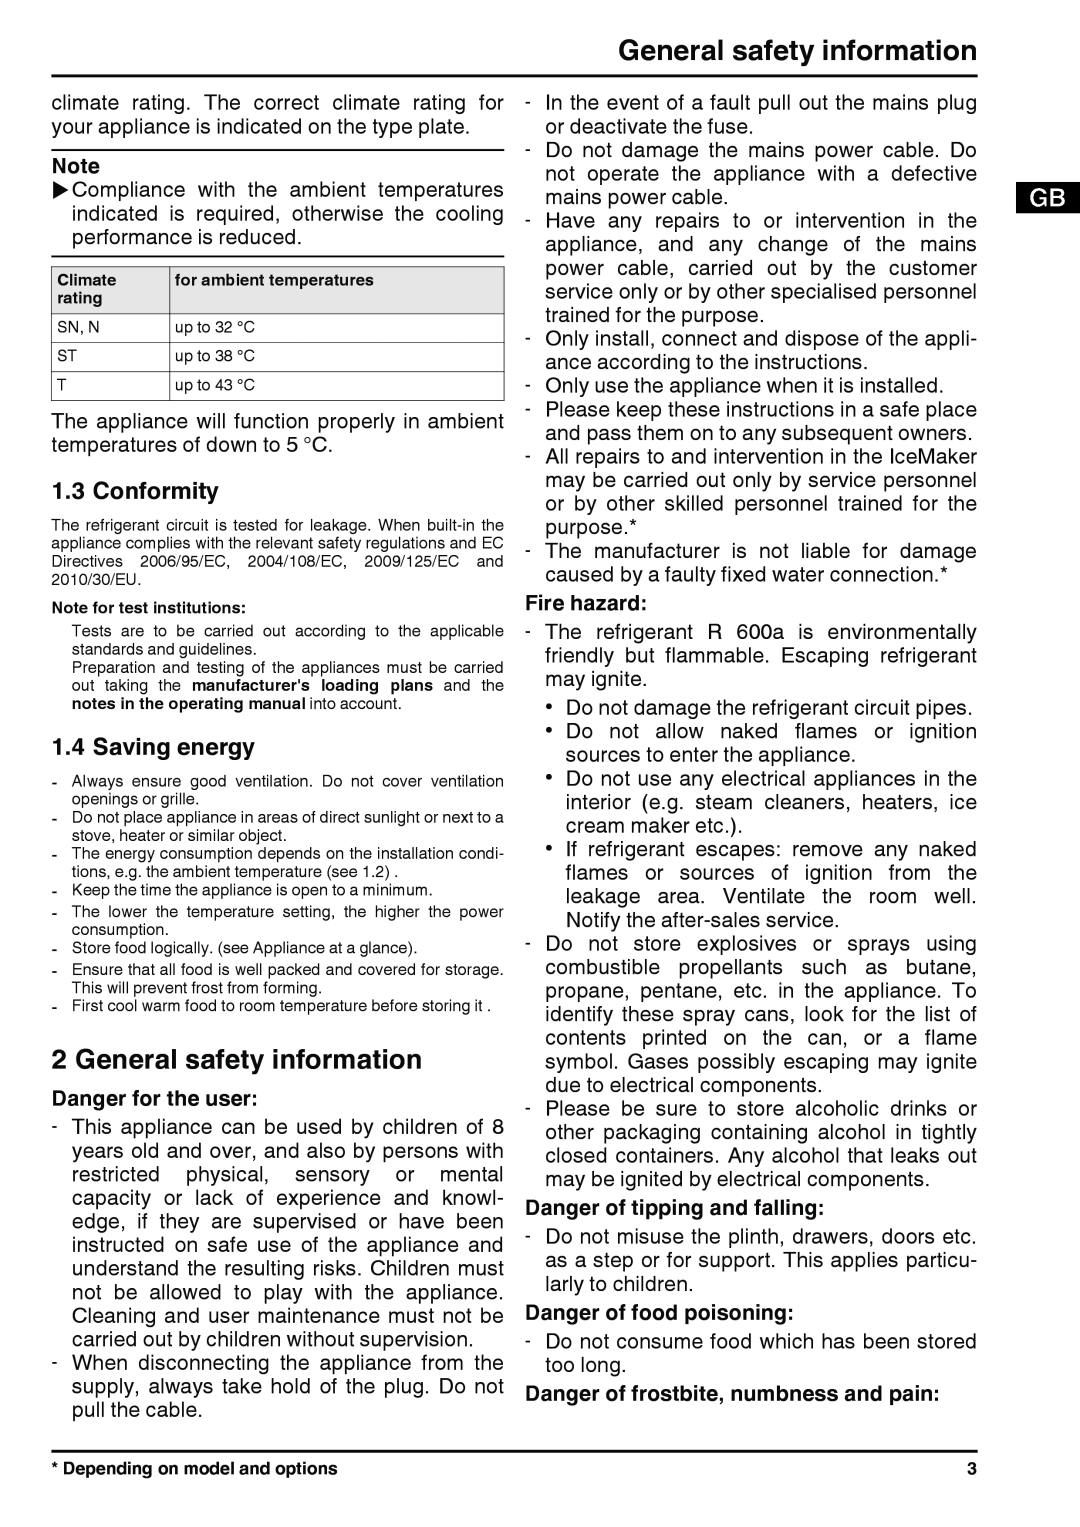 Liebherr 120713 7082694 - 01 manual General safety information, Conformity, Saving energy, Danger for the user, Fire hazard 